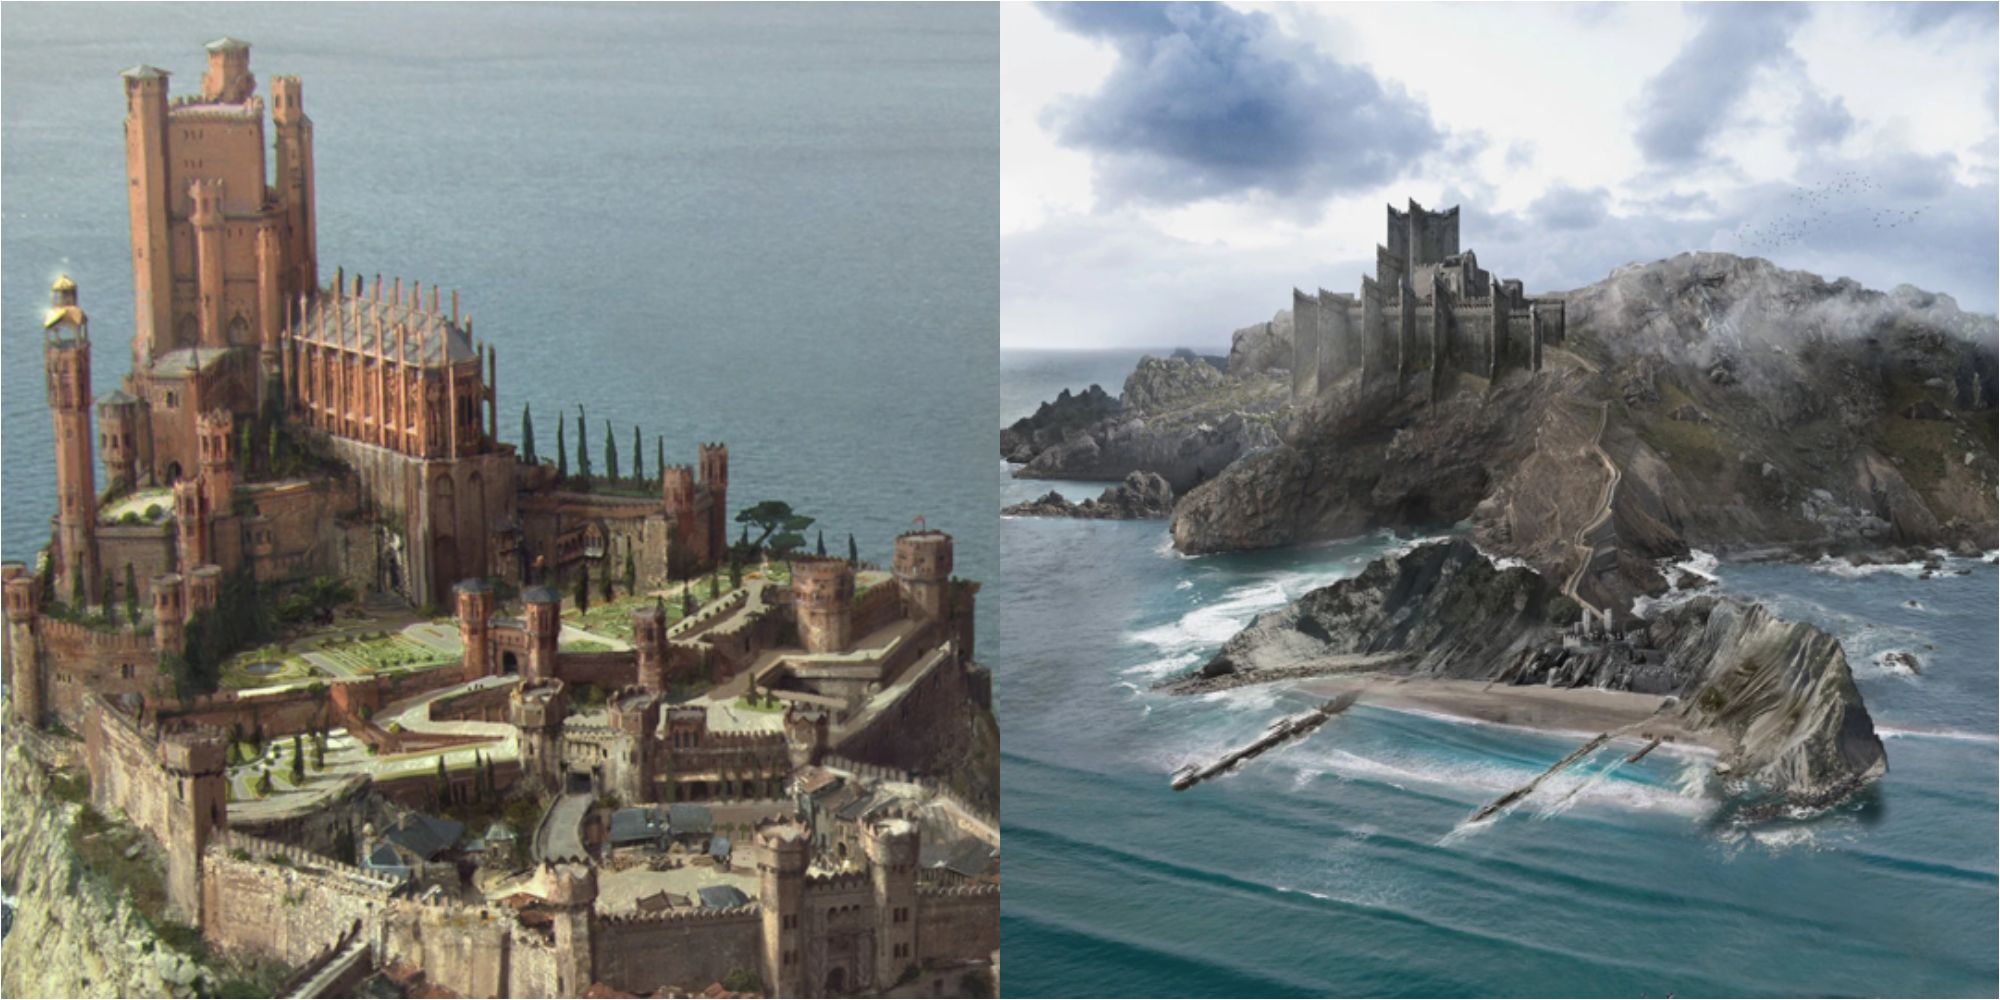 The-Red-Keep-and-Dragonstone-in-Game-of-Thrones.jpg